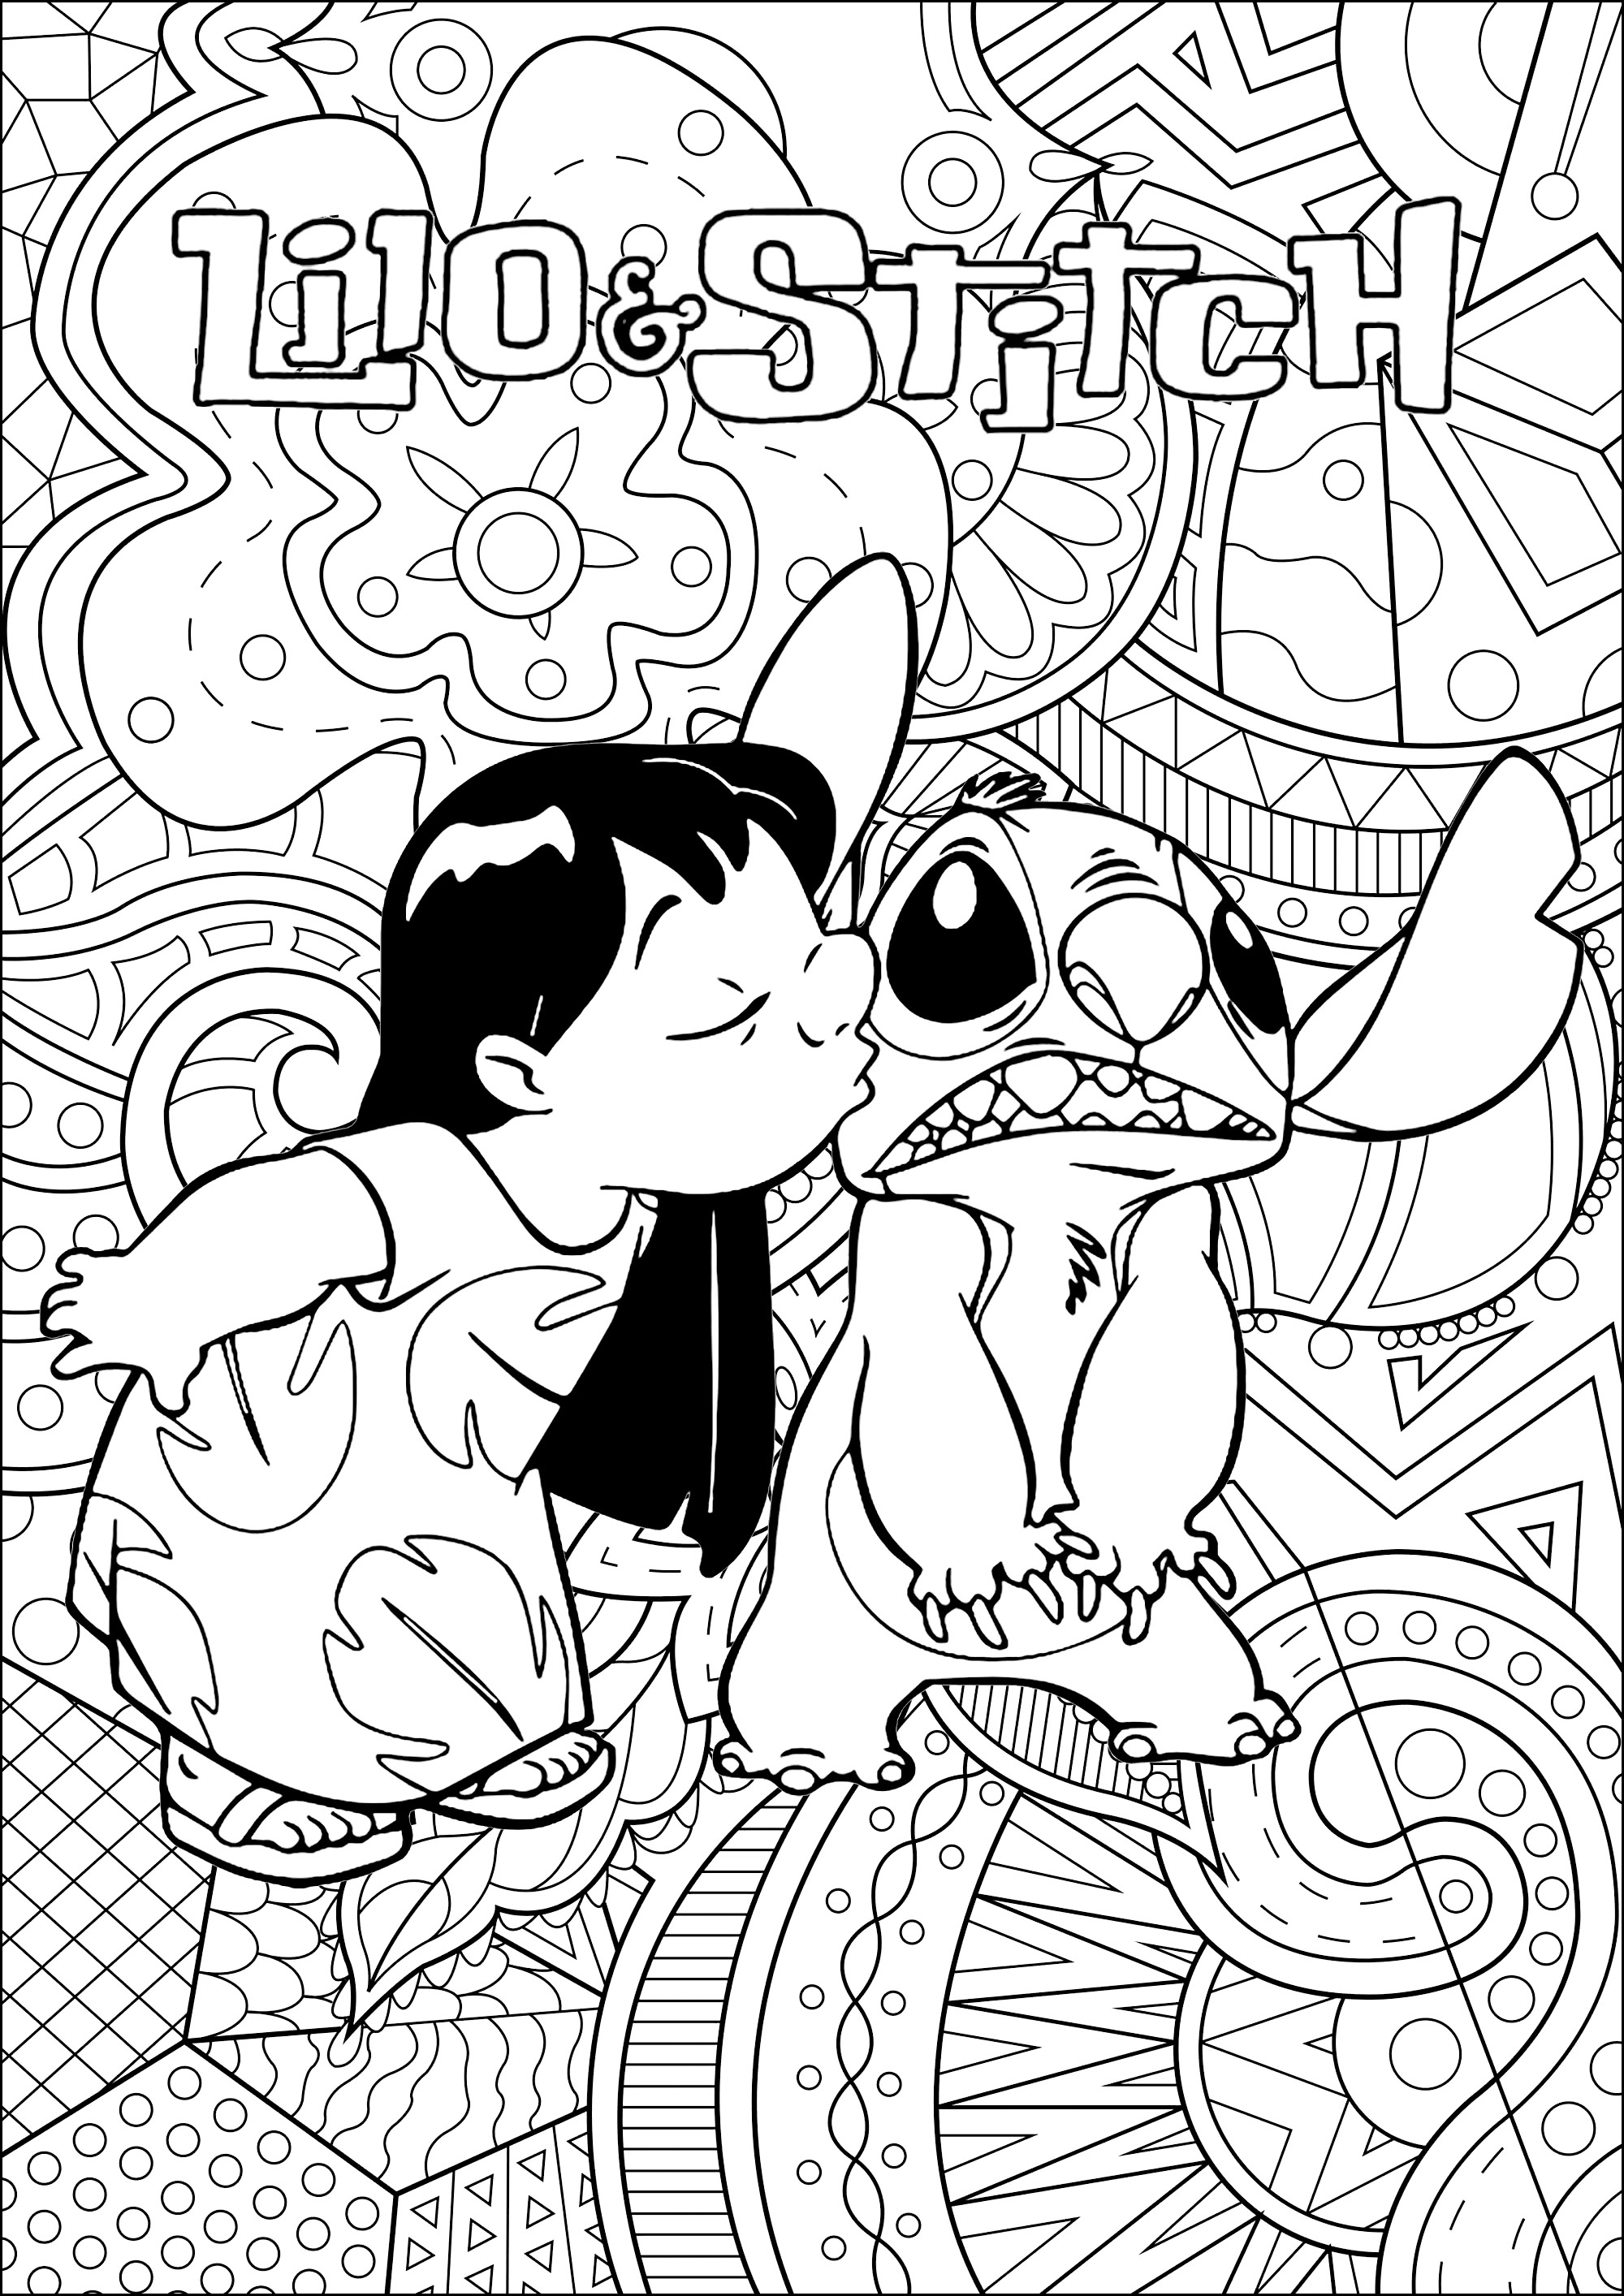 Lilo and Stitch Coloring book of The New Year and Winter